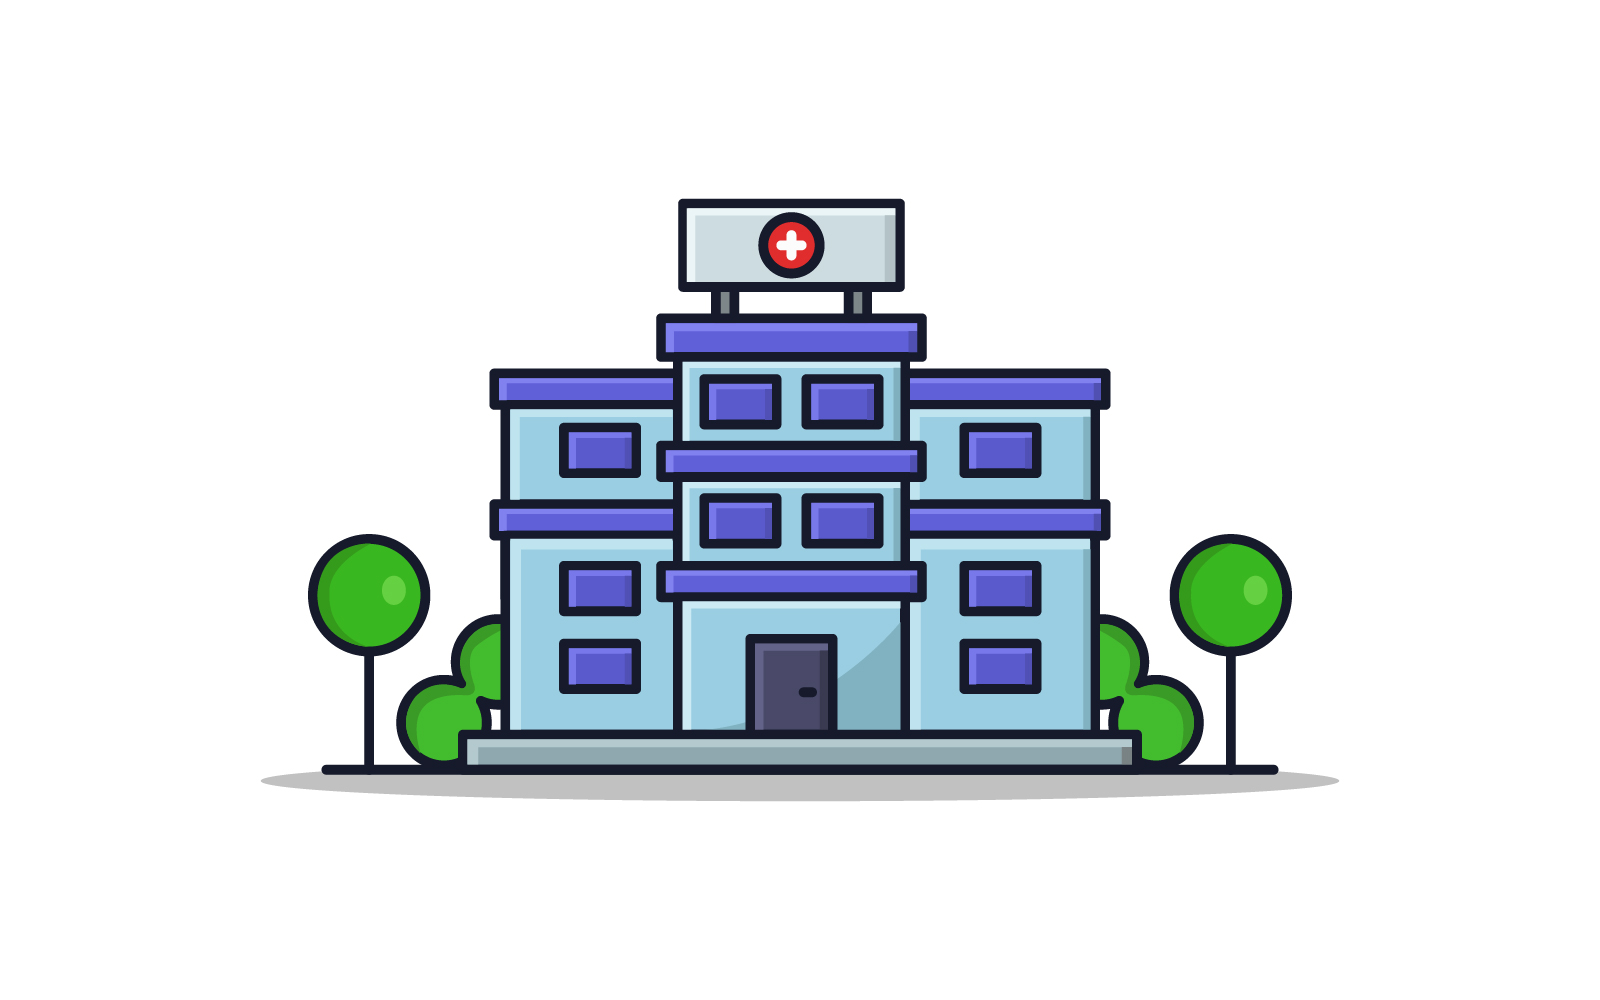 Hospital illustrated in vector on white